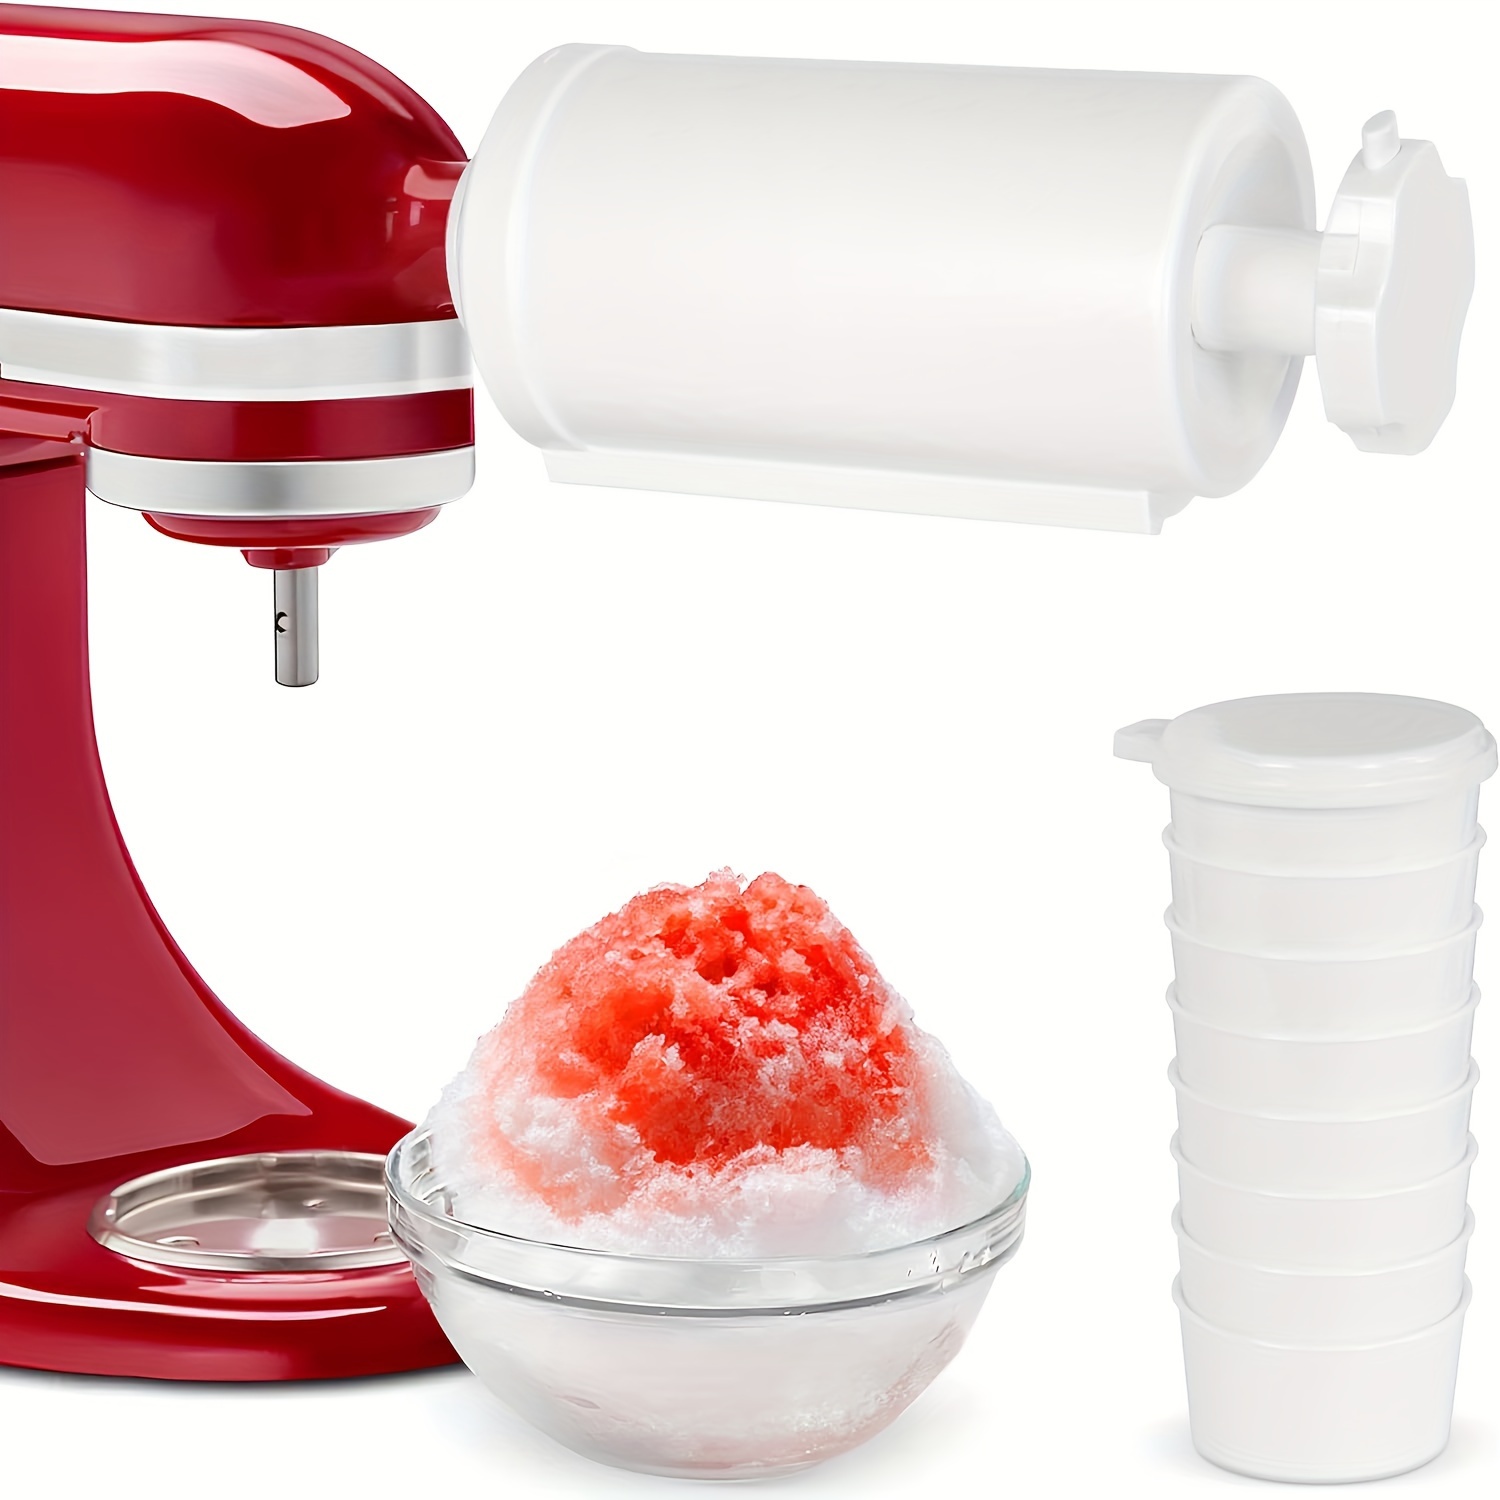 Ice Shaver Attachment for KitchenAid Stand Mixer- Efficient Shaved Ice Maker High Production Shave Ice Machines Essential Mixer Parts & Accessorie